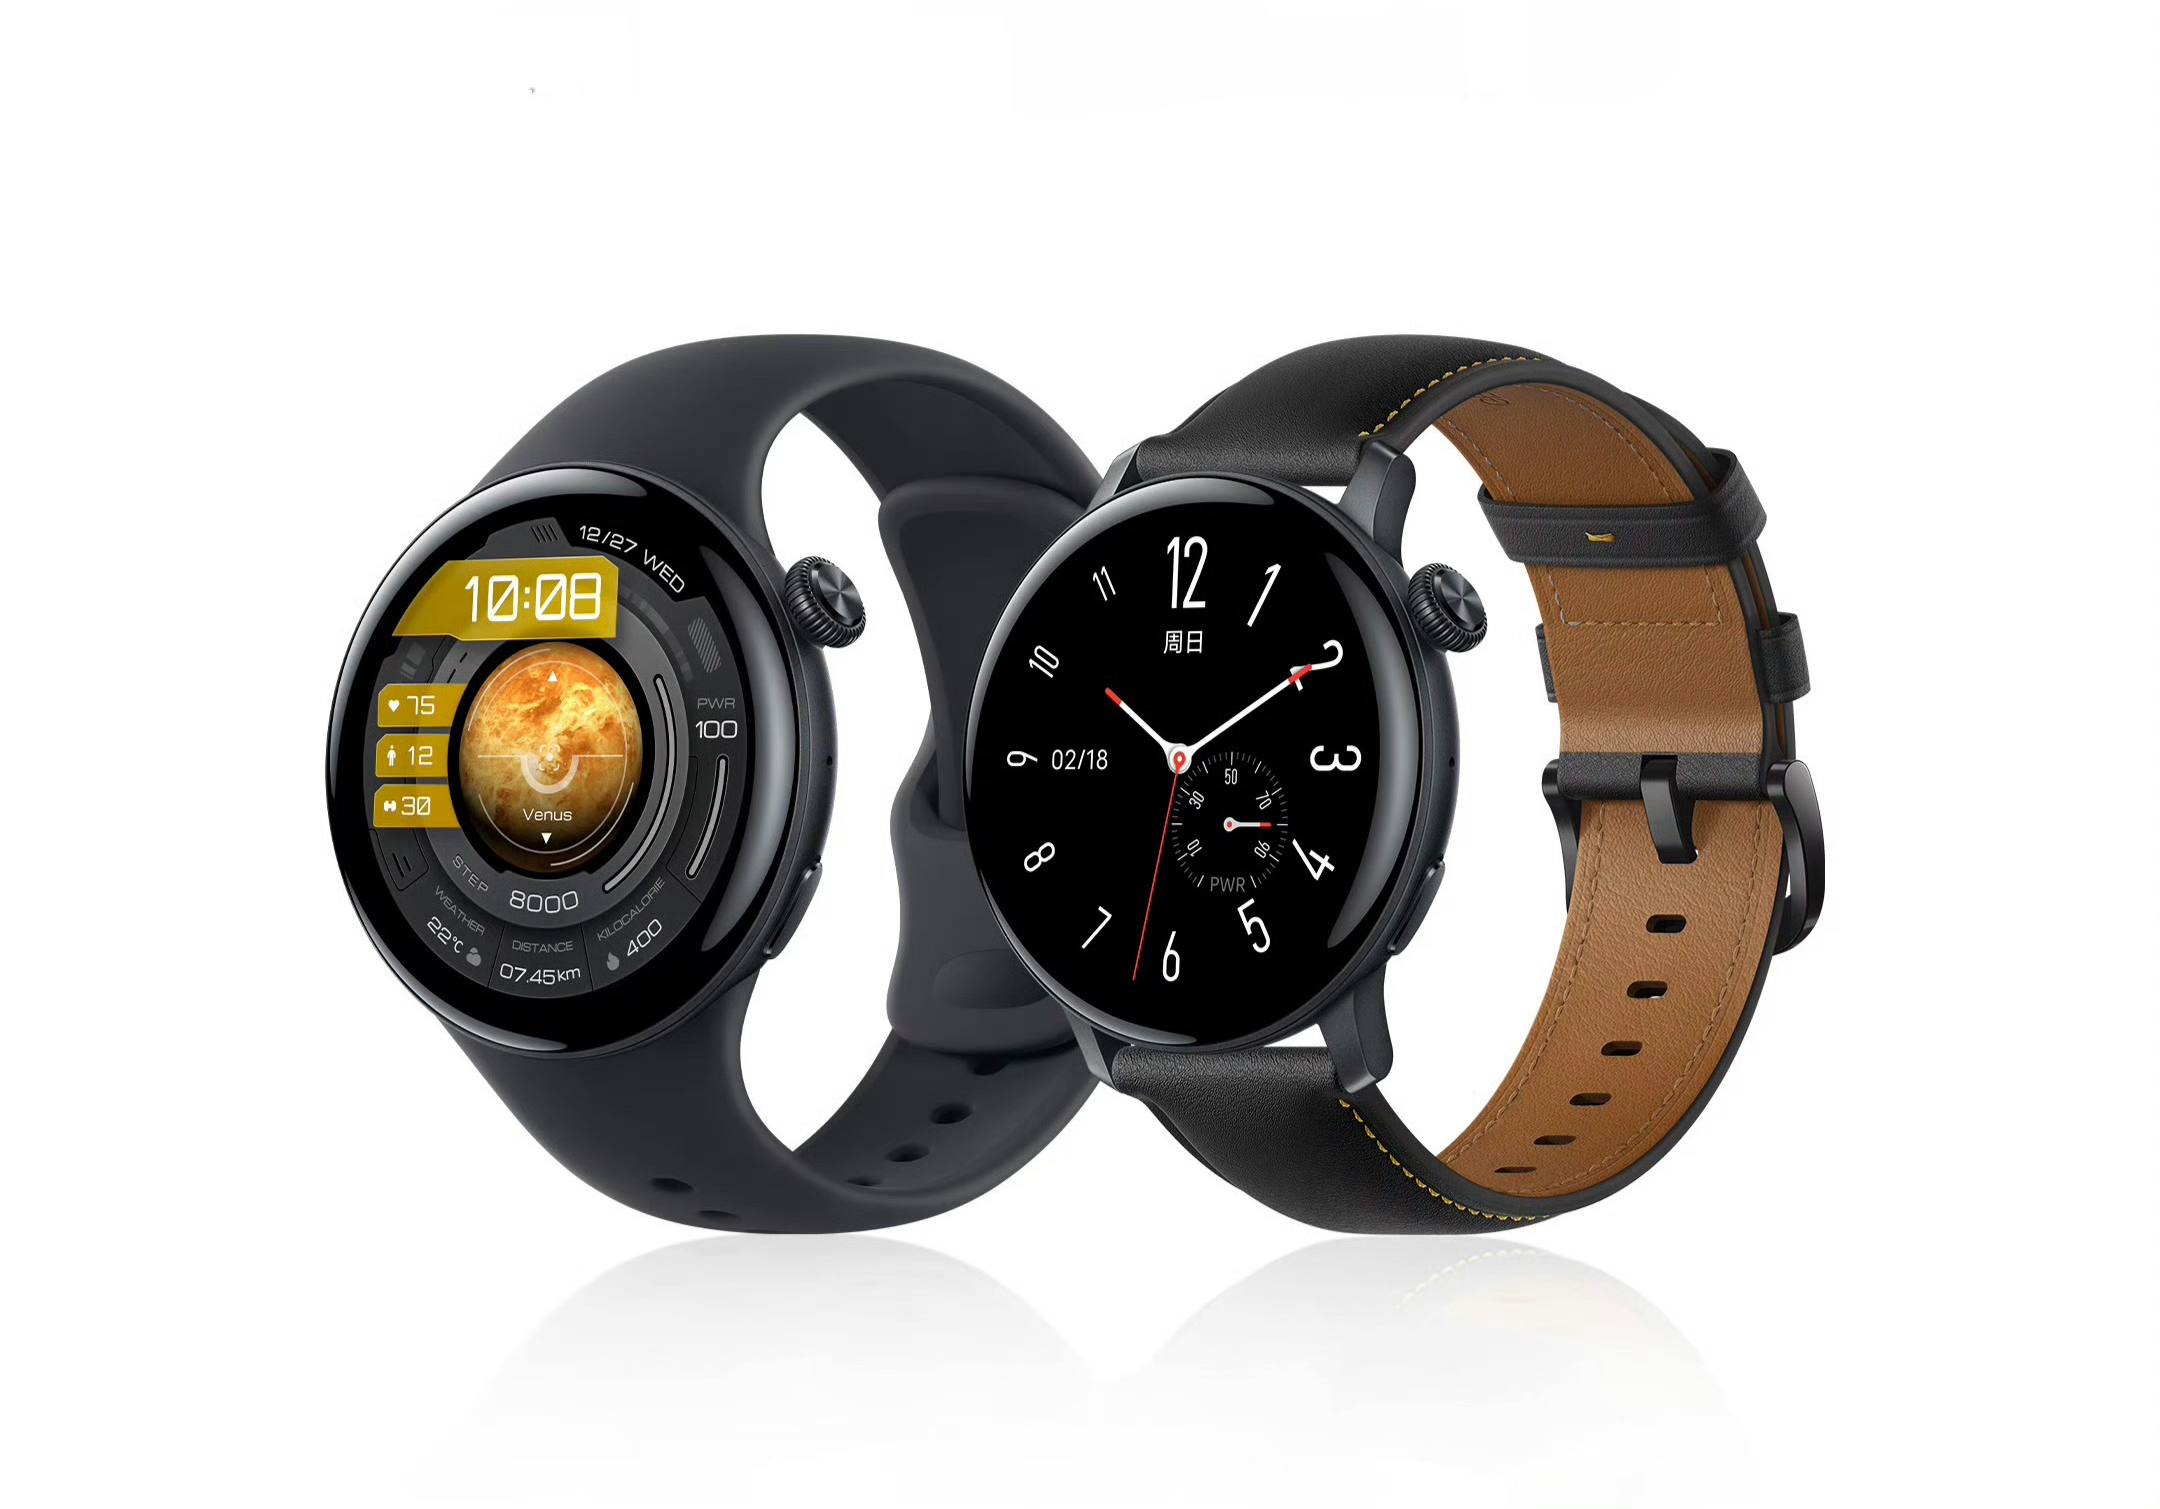 Here's what the iQOO Watch will look like: the brand's first eSIM-enabled smartwatch